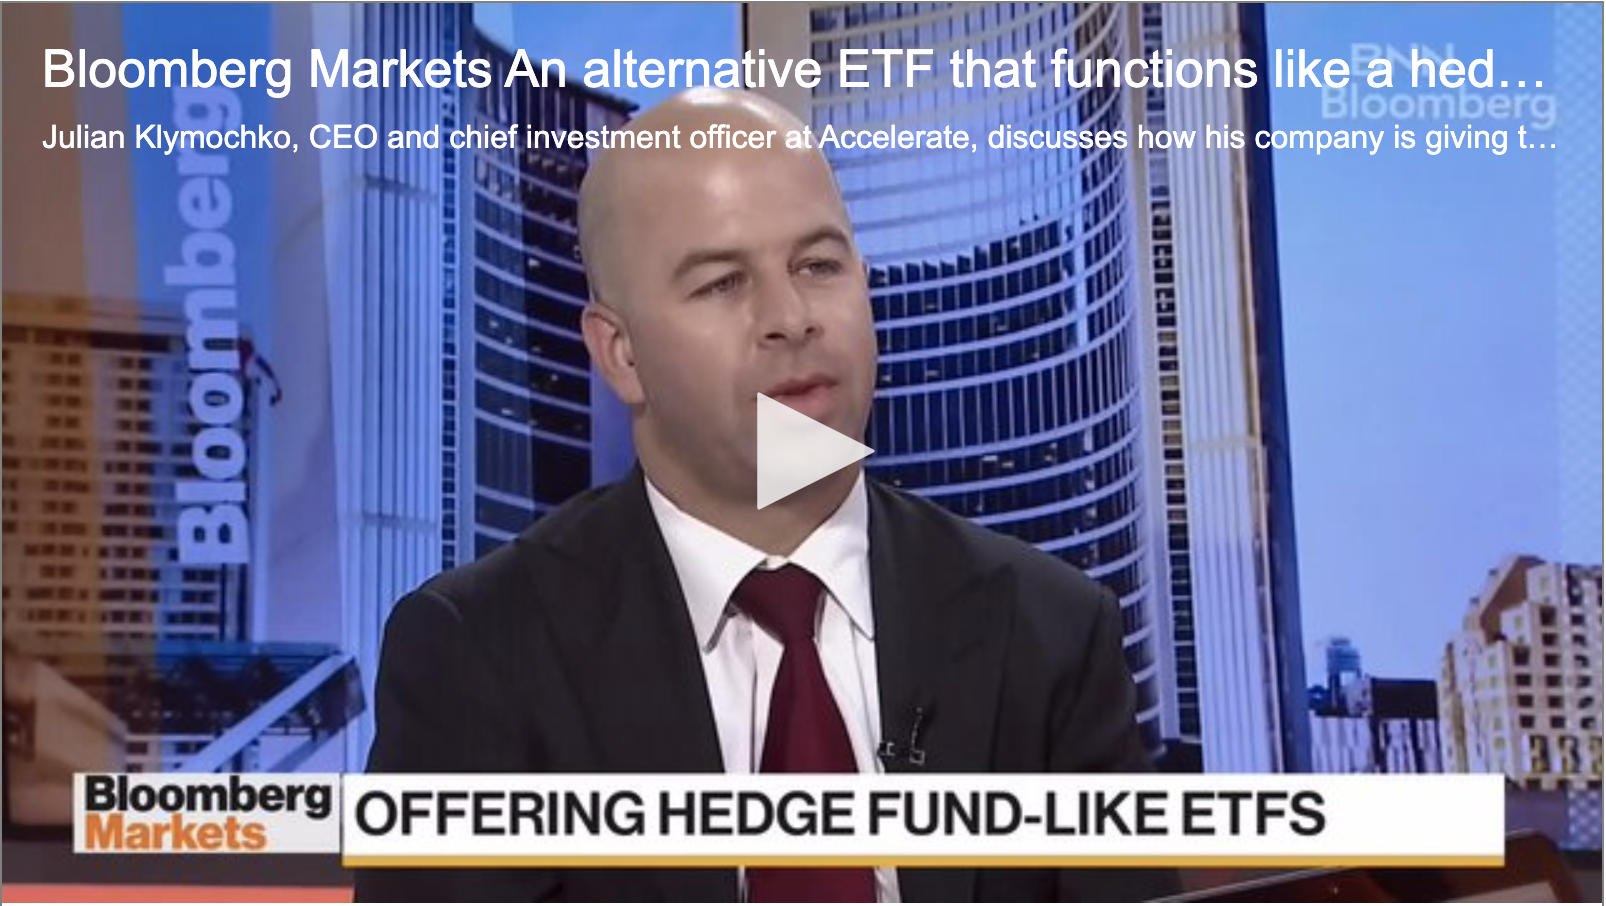 BNN Bloomberg: An Alternative ETF that Functions Like a Hedge Fund